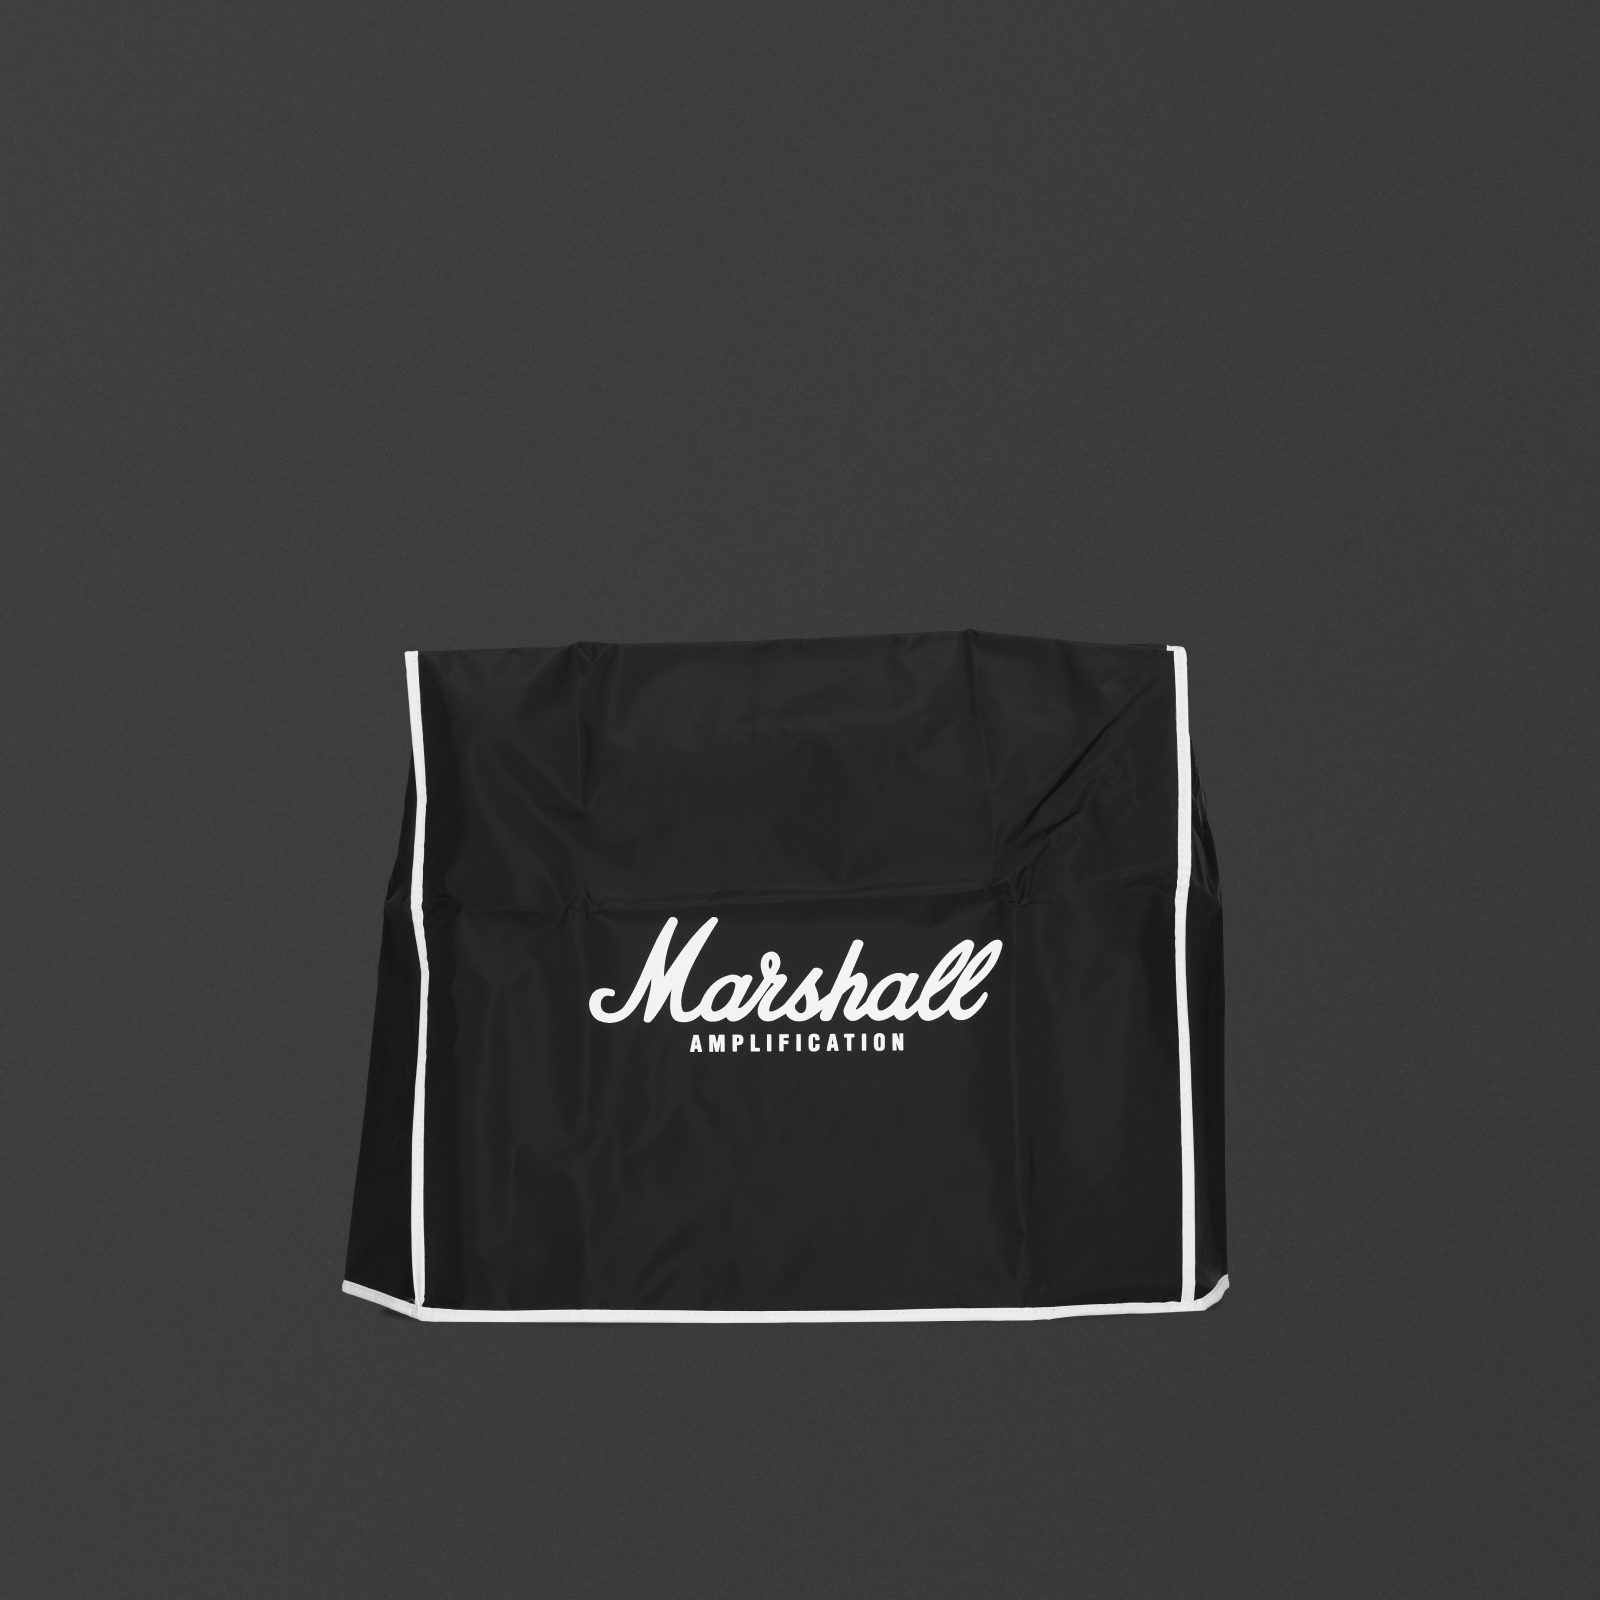 Image of Marshalls MG10G Dust Cover in black